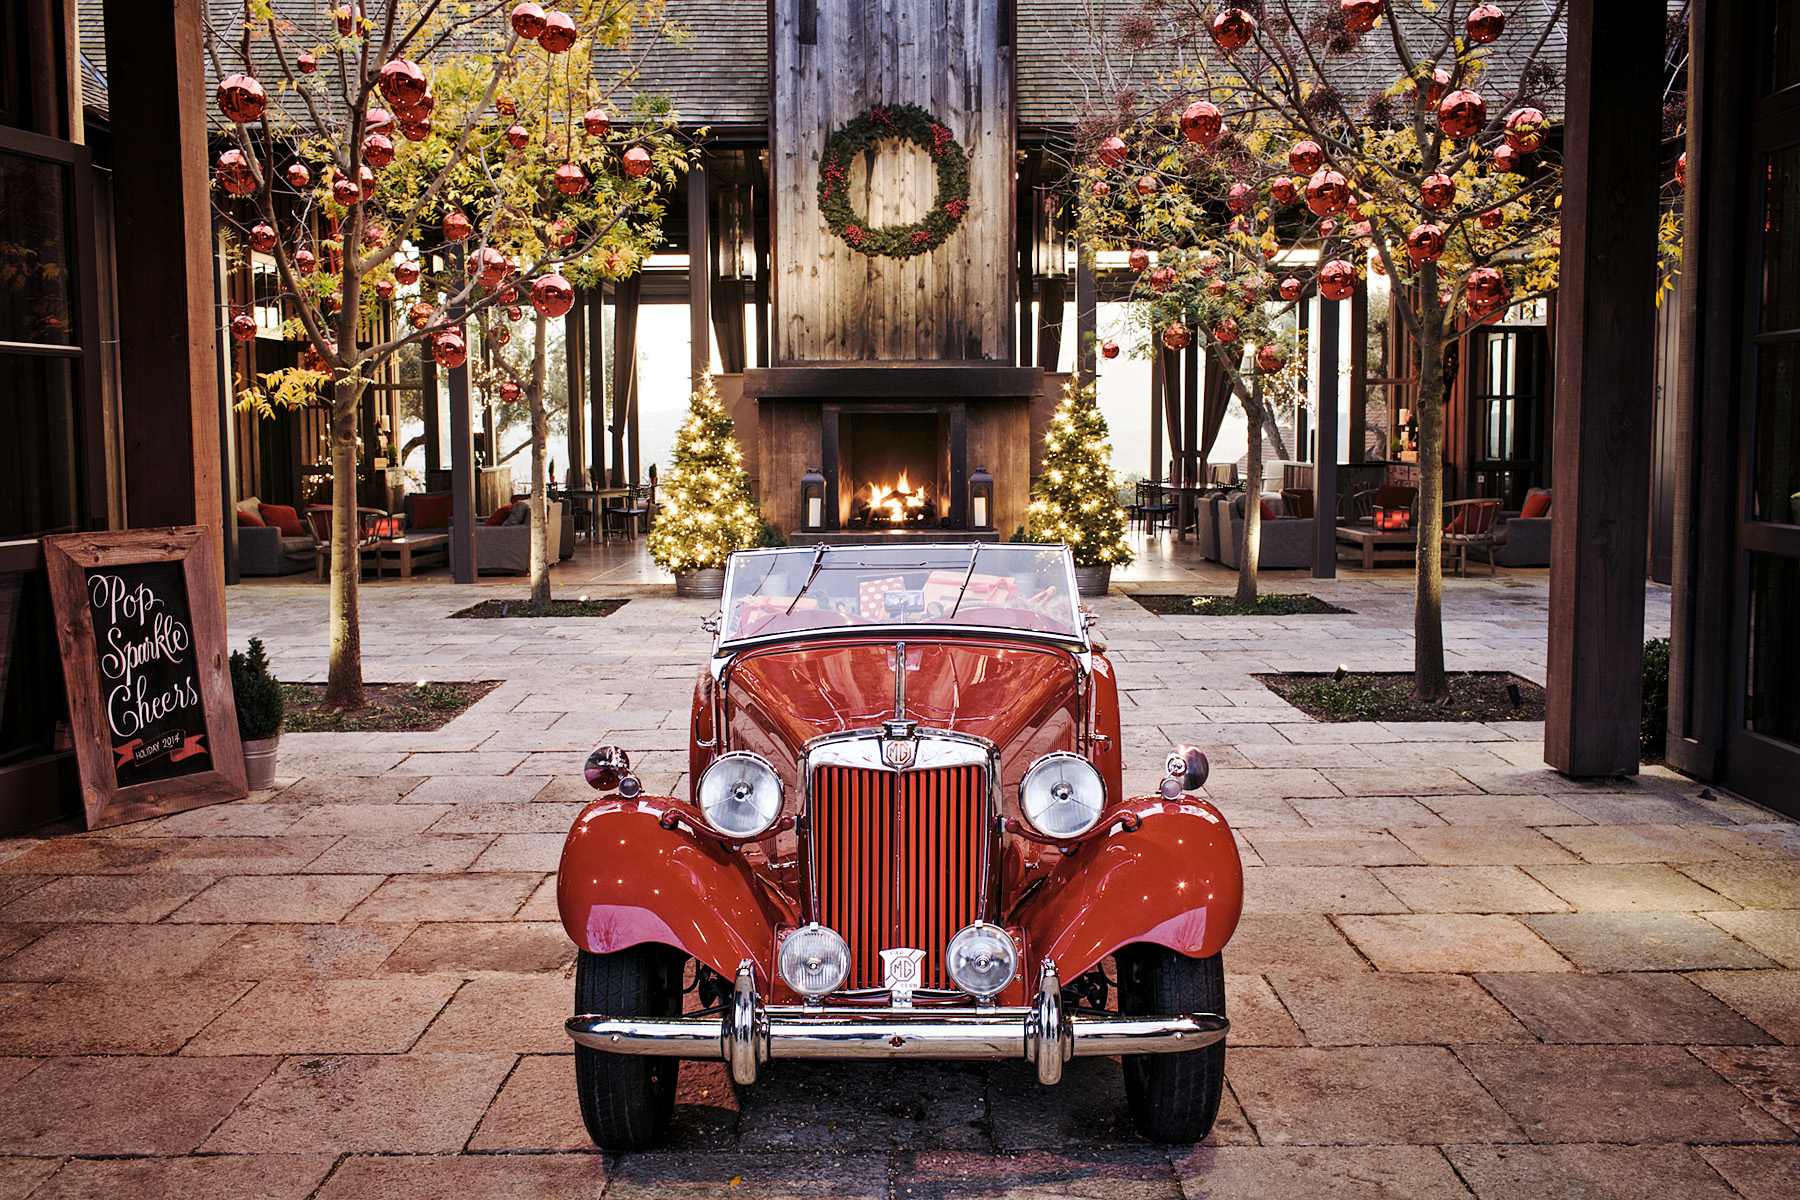 An old-fashioned red car sits under a Christmas wreath.